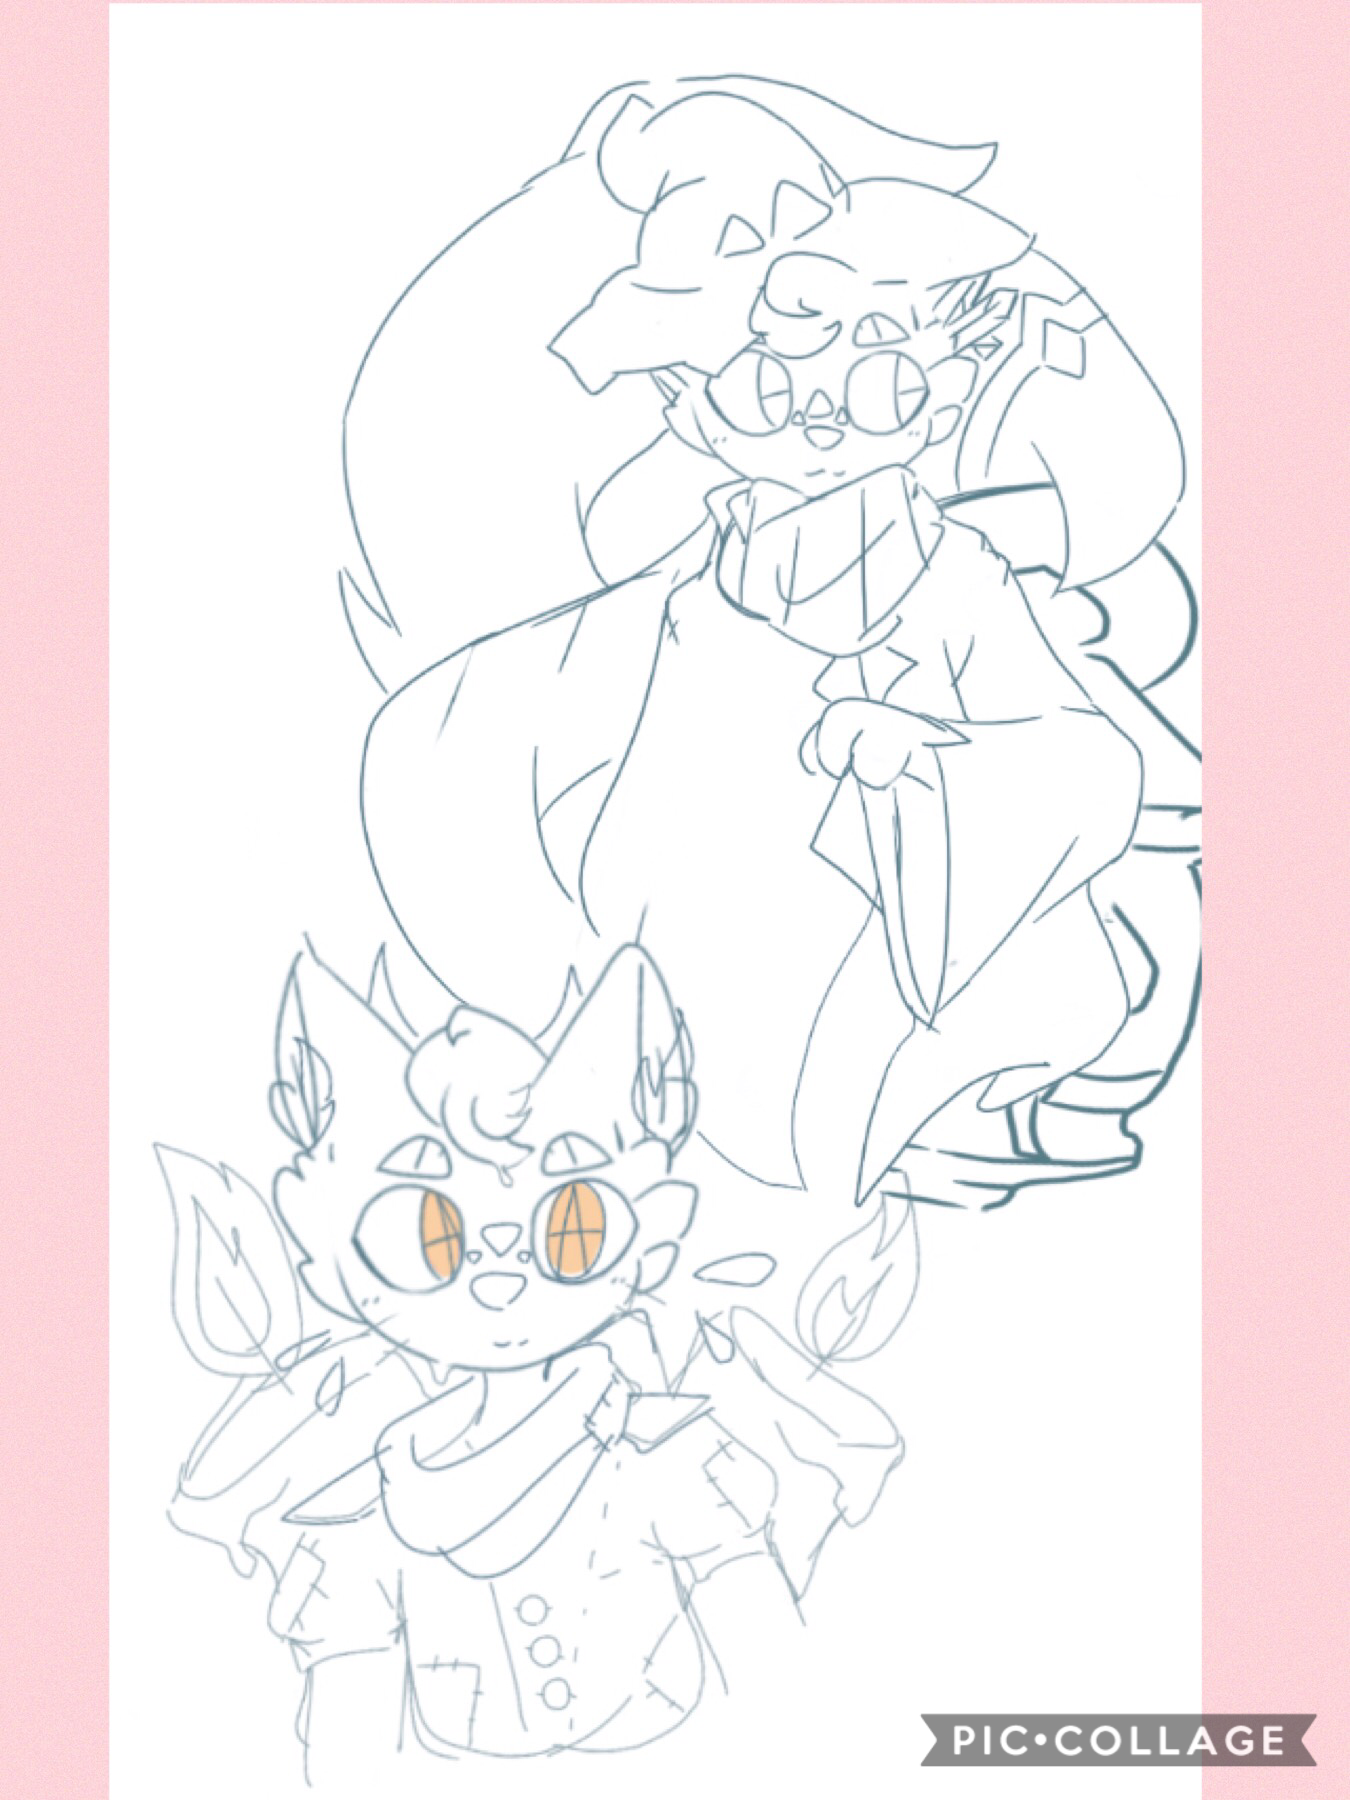 tap
ok so ive kinda been developing a small realm or two of my own, and it’s pretty spicy.
might post about it if anyone’s interested. anyway have two little wips of my children